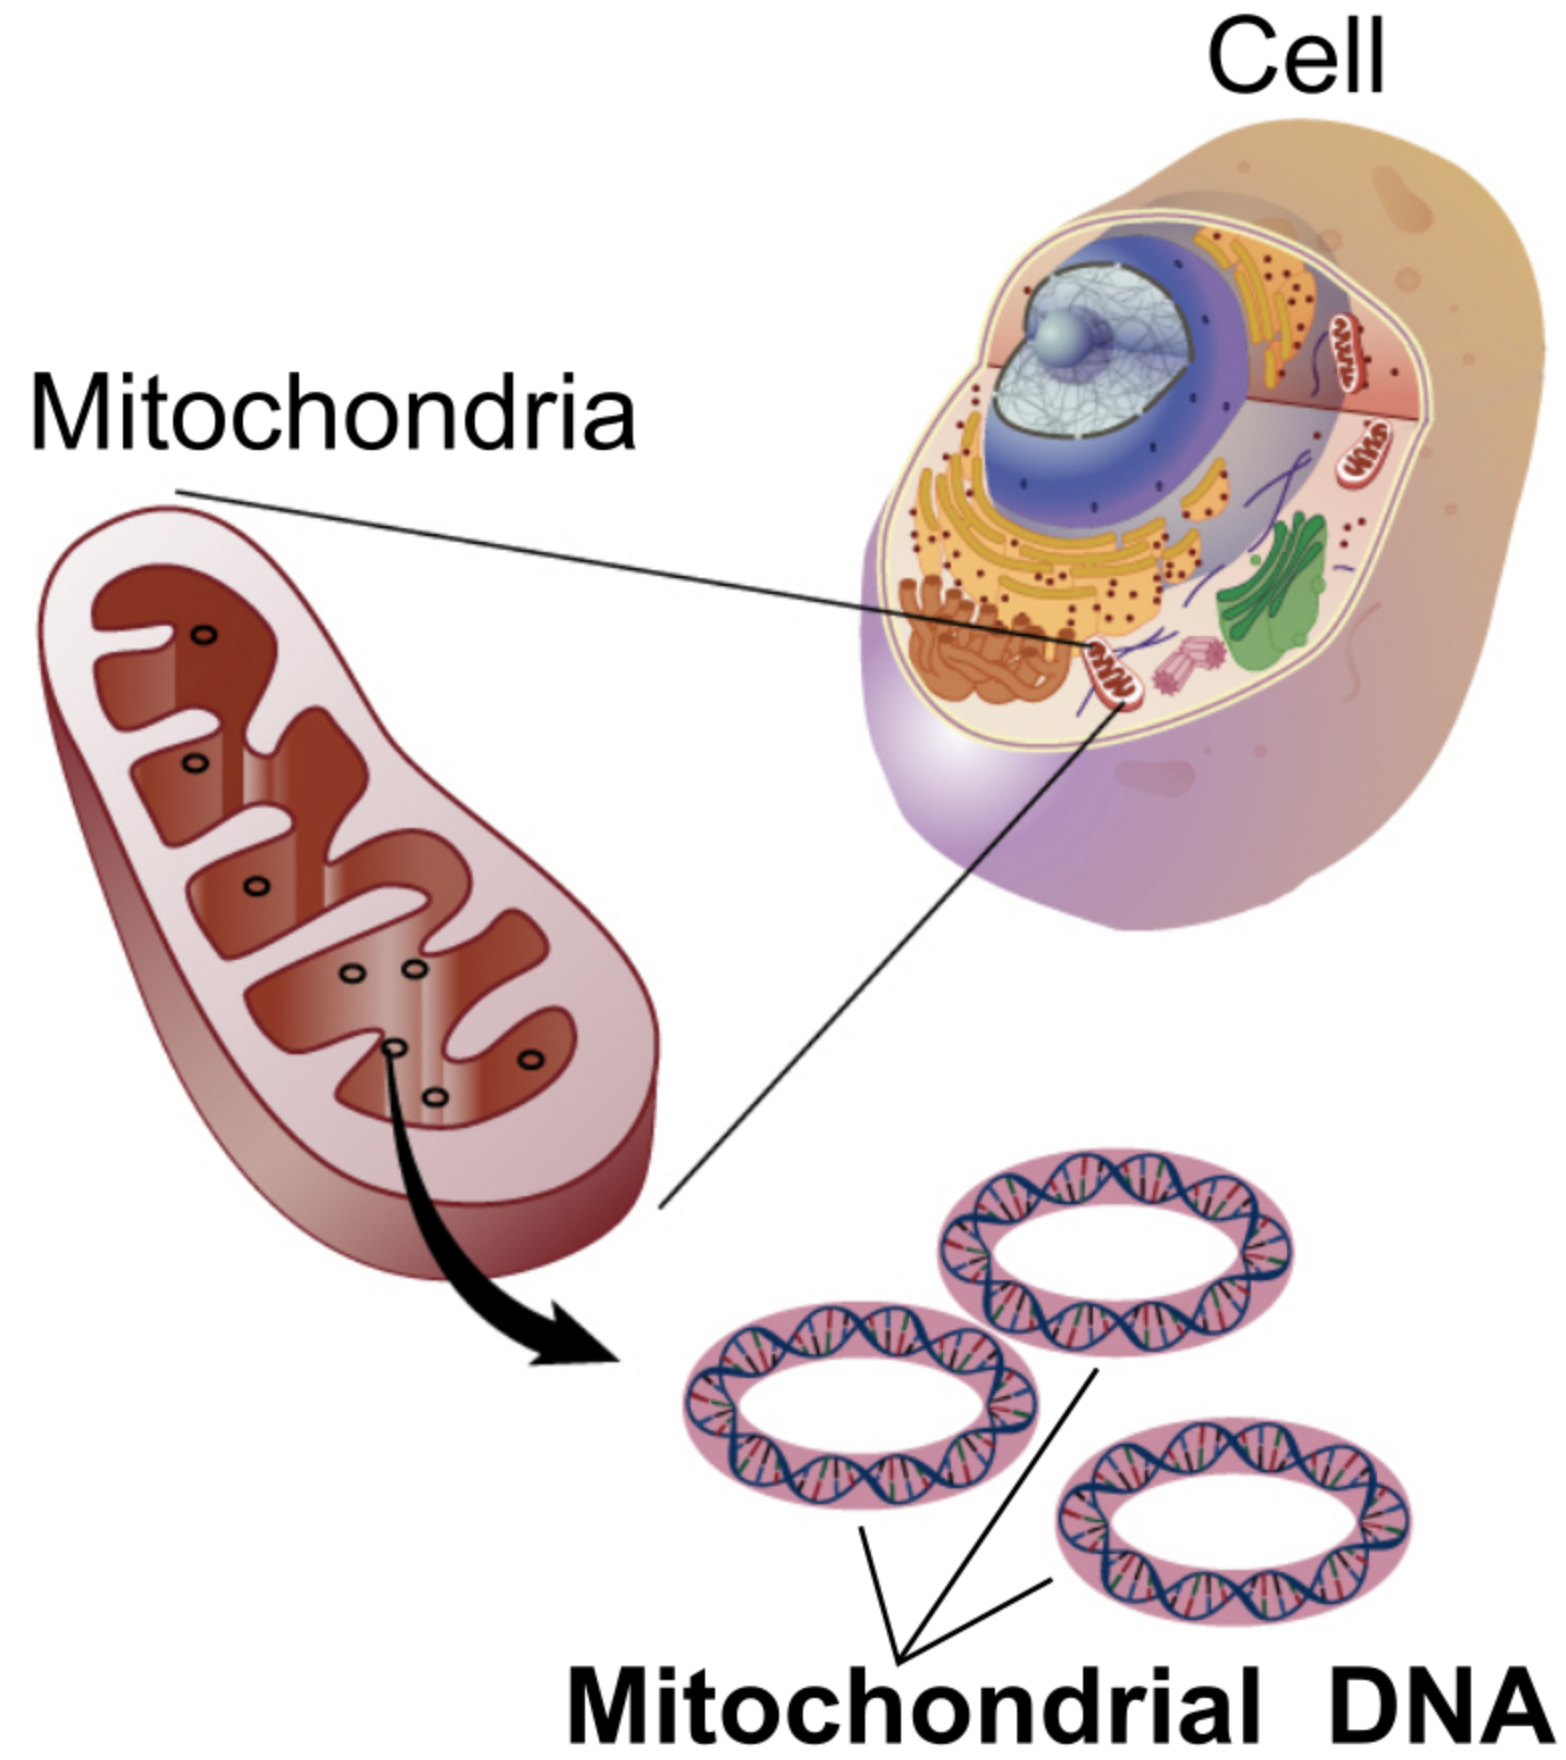 [Figure 1] Mitochondrial DNA in Eukaryotic Cells (Source: Wikipedia; Mitochondrial DNA)